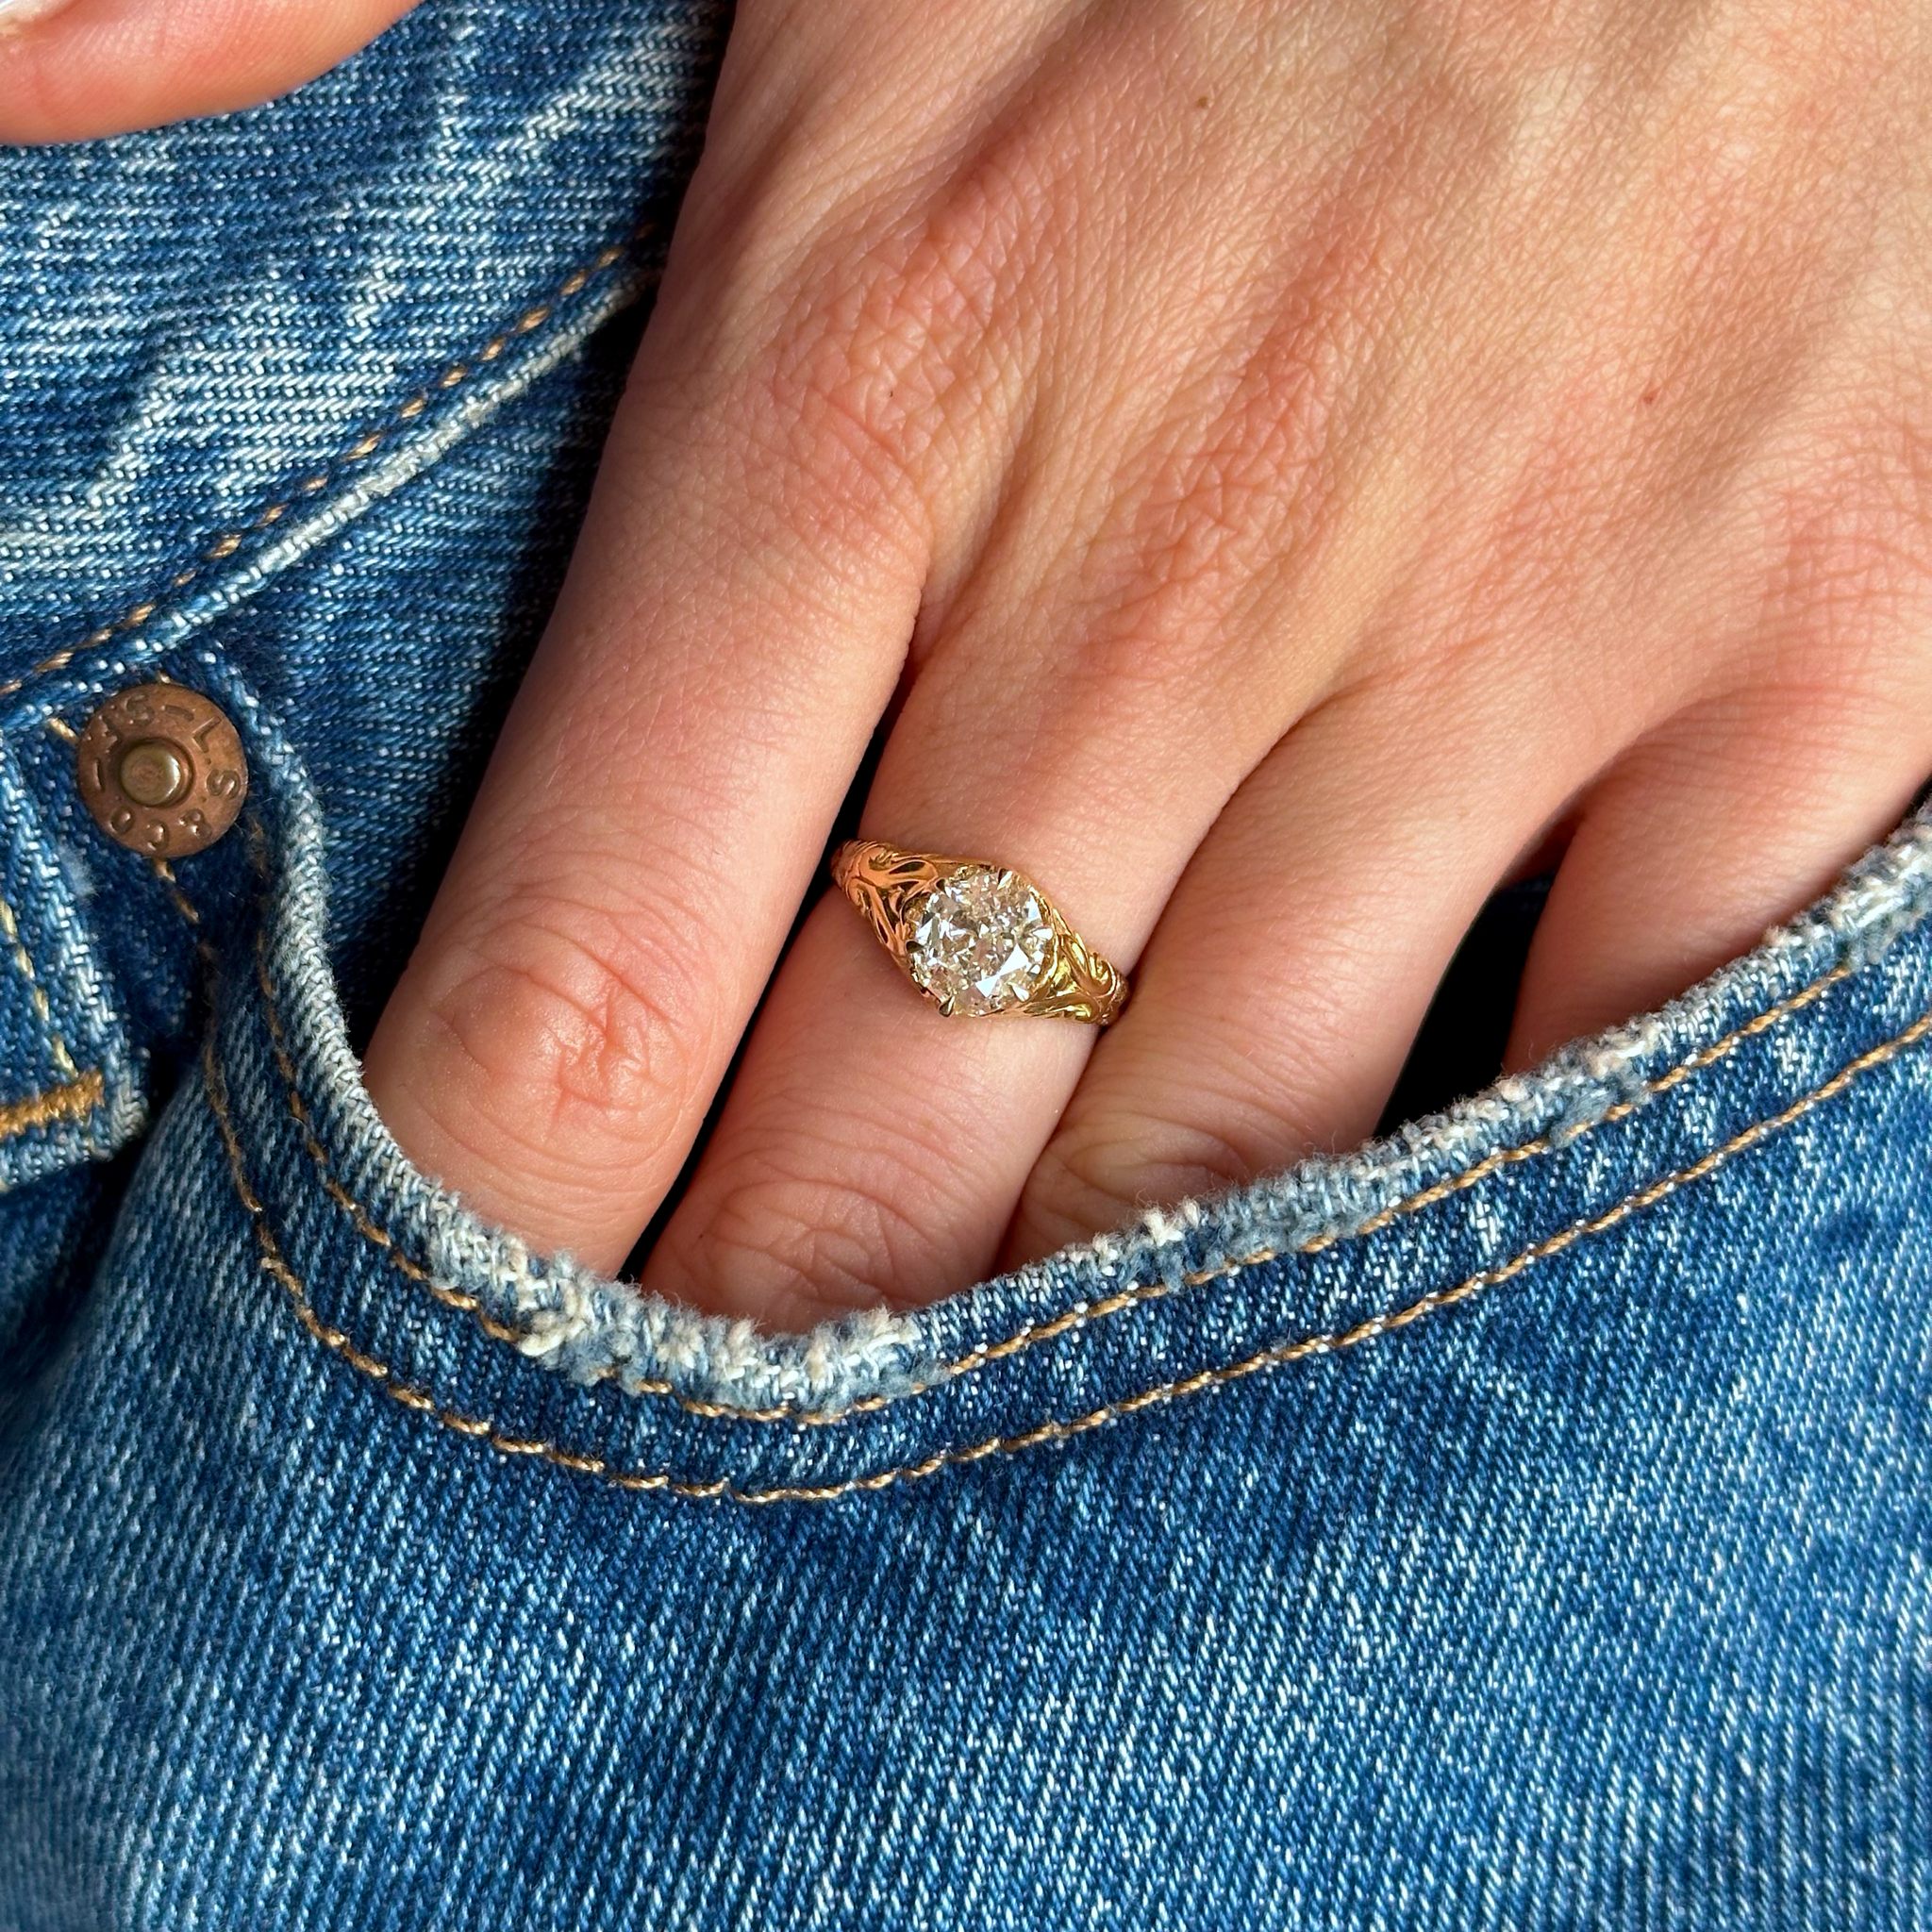 Diamond solitaire engagement ring worn on hand photographed in pocket of jeans